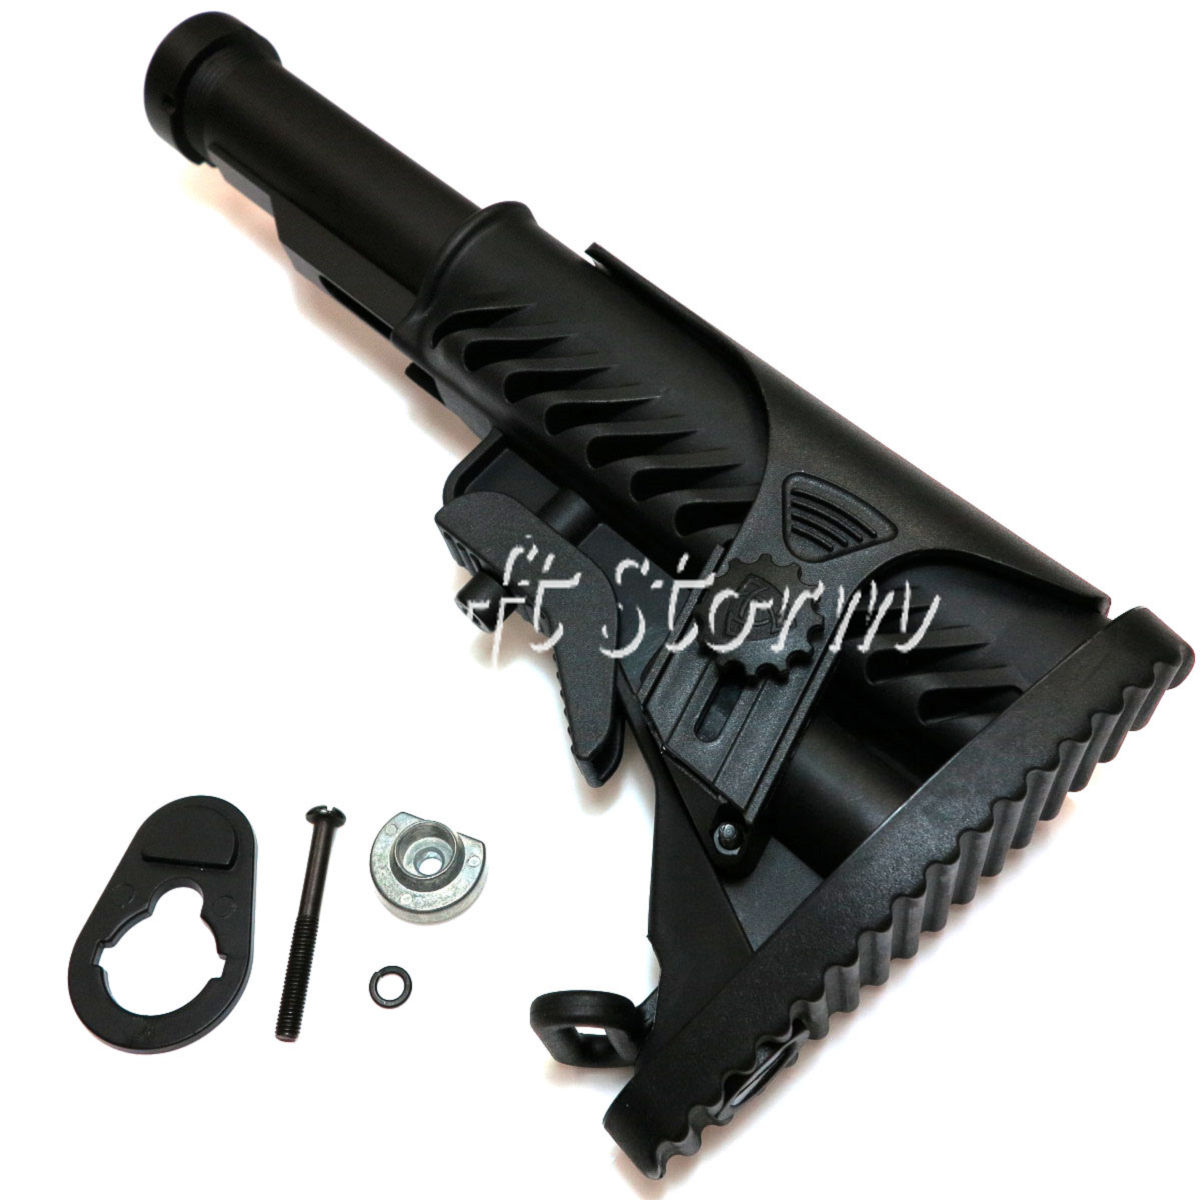 Airsoft Tactical Gear APS M4A64 Shark Style M4 Stock with Cheek Piece Set Black - Click Image to Close